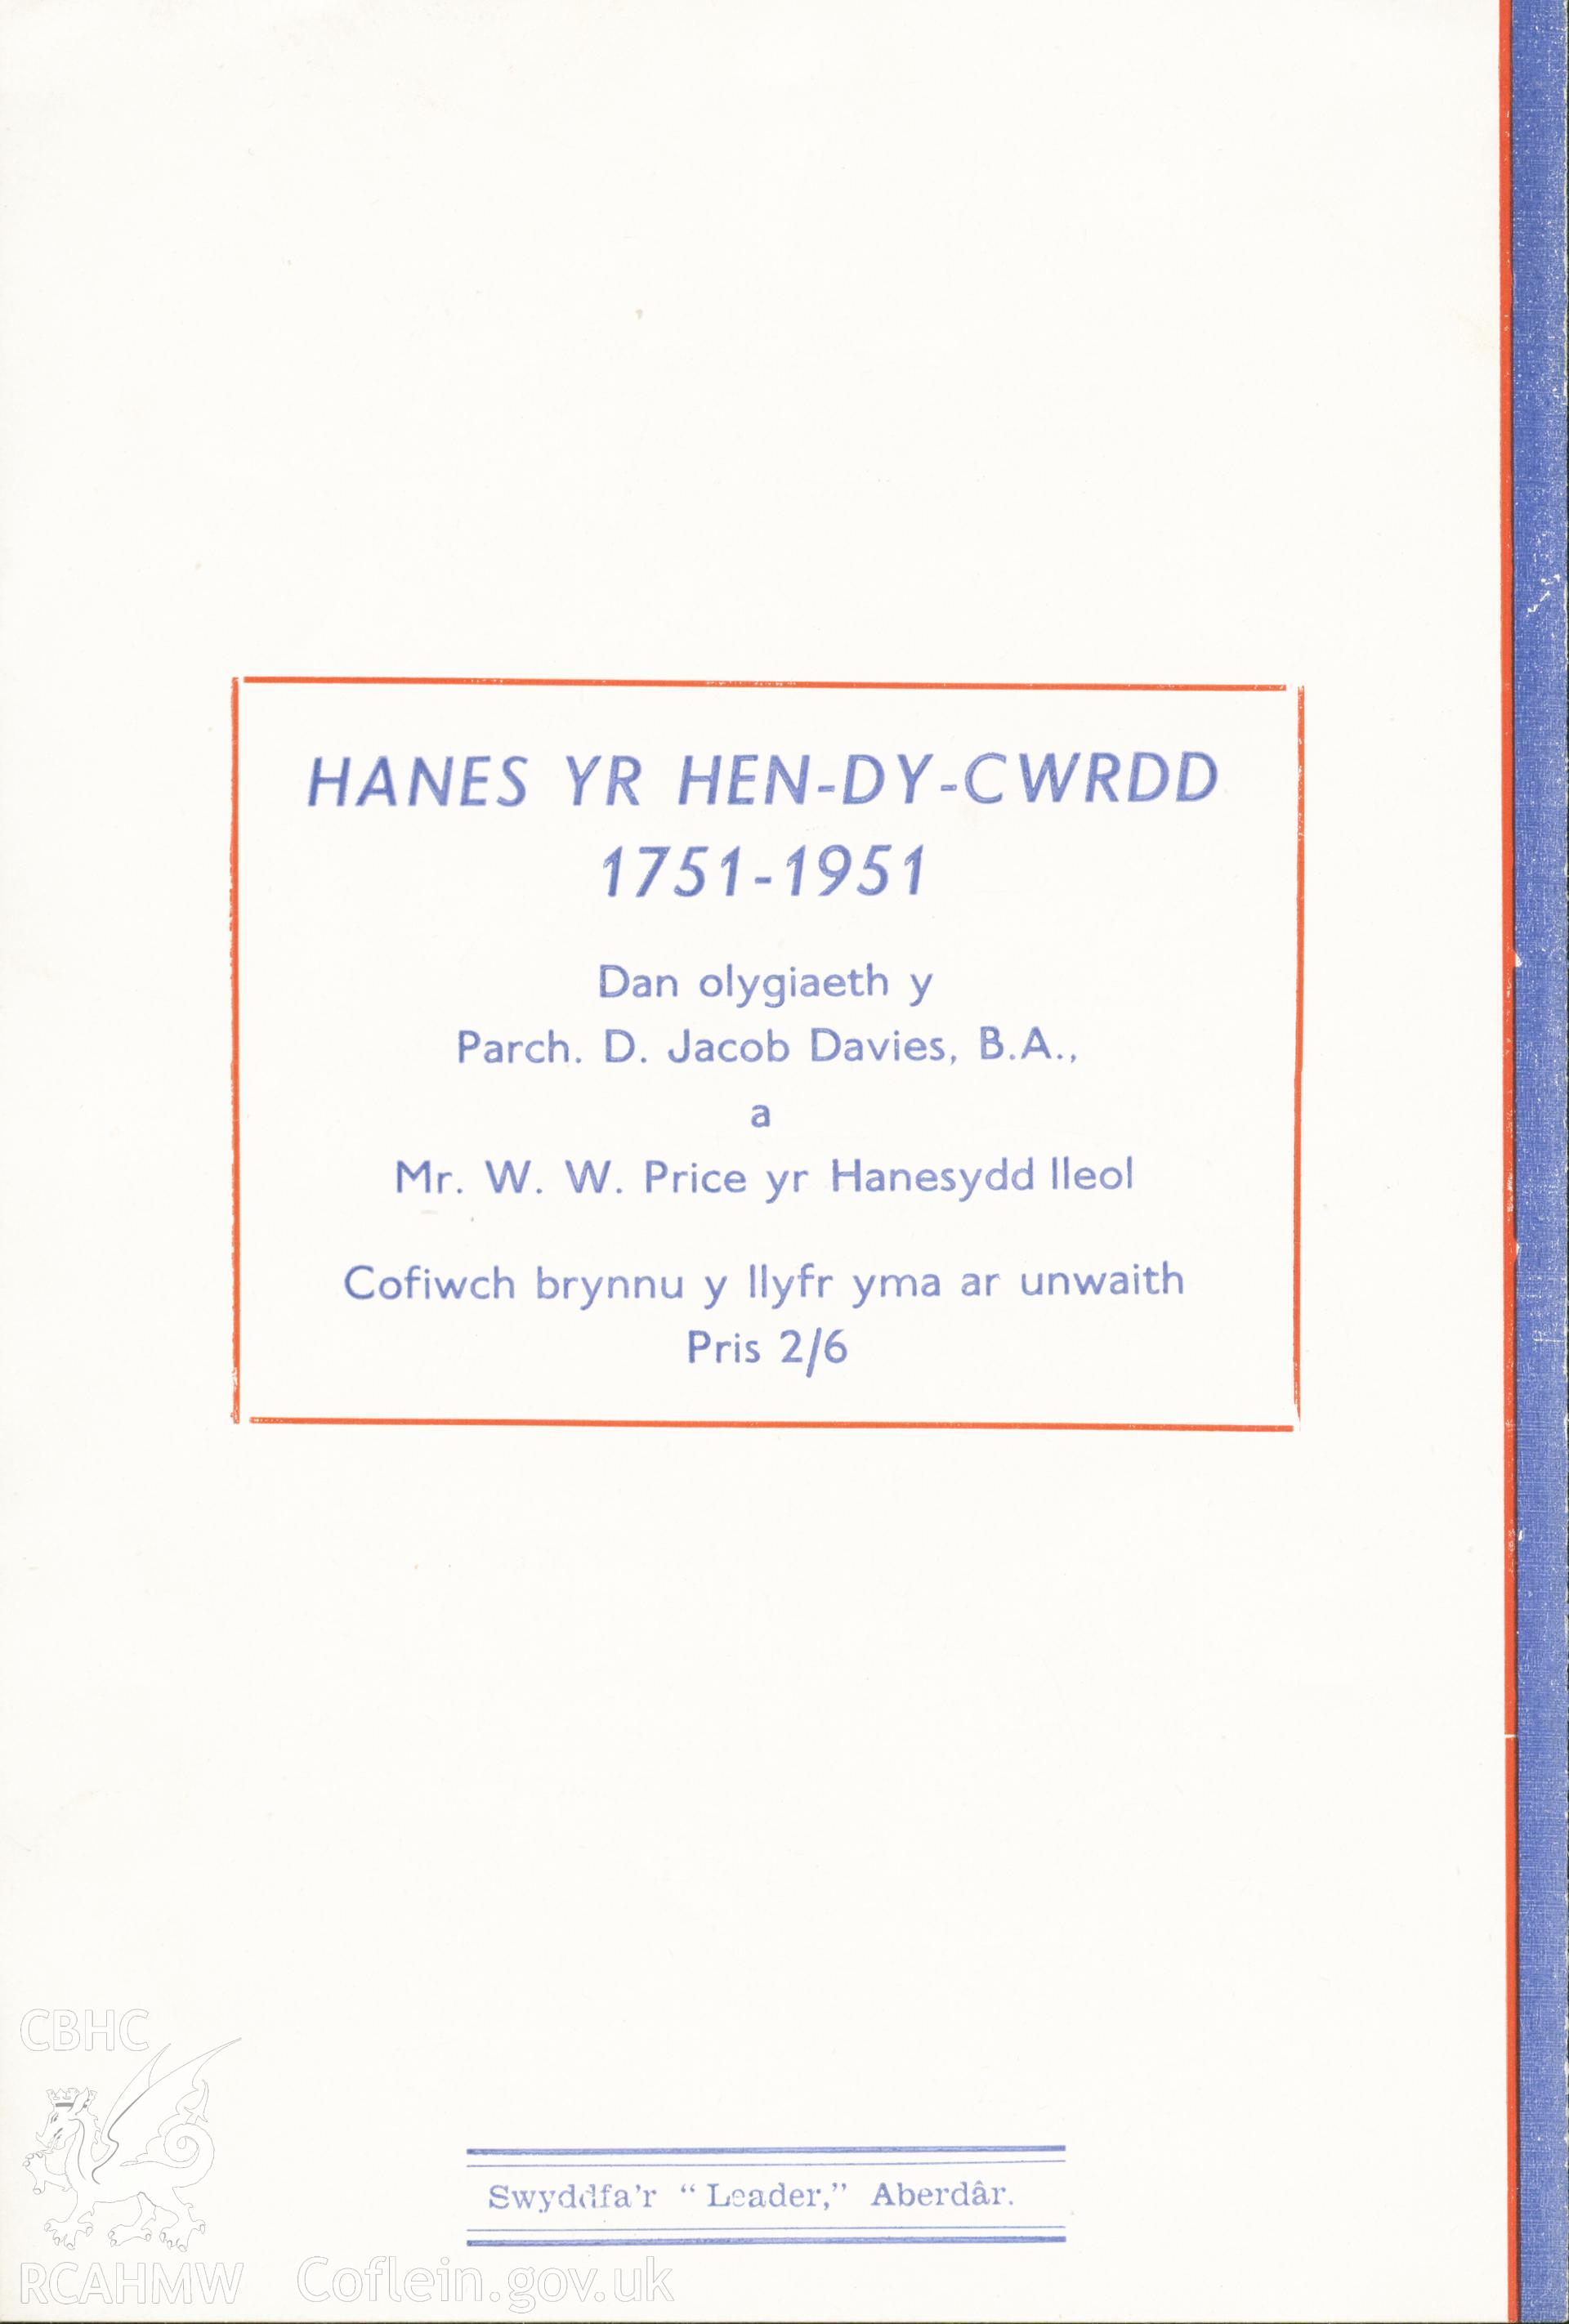 Advert for book 'Hanes yr Hen-Dy-Cwrdd 1751 - 1951' on the back of the programme of events to celebrate the two hundredth anniversary of Hen-Dy-Cwrdd, Trecynon, Aberdare on 27th March 1951. Donated to the RCAHMW during the Digital Dissent Project.